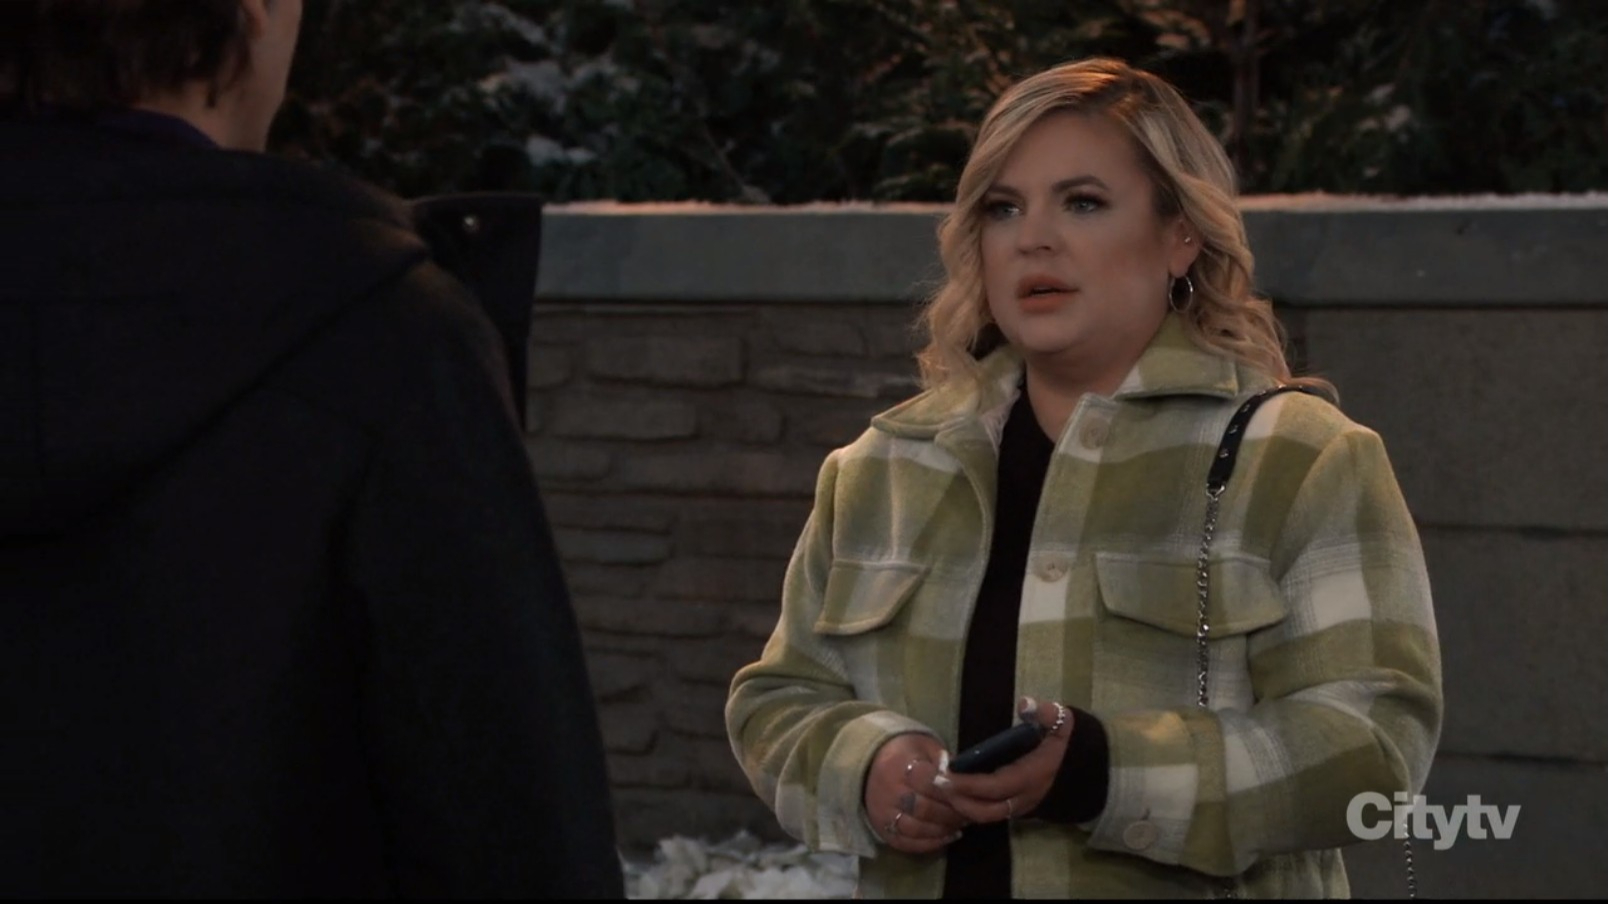 maxie in an ugly outfit again, sadly General Hospital recaps SoapsSpoilers